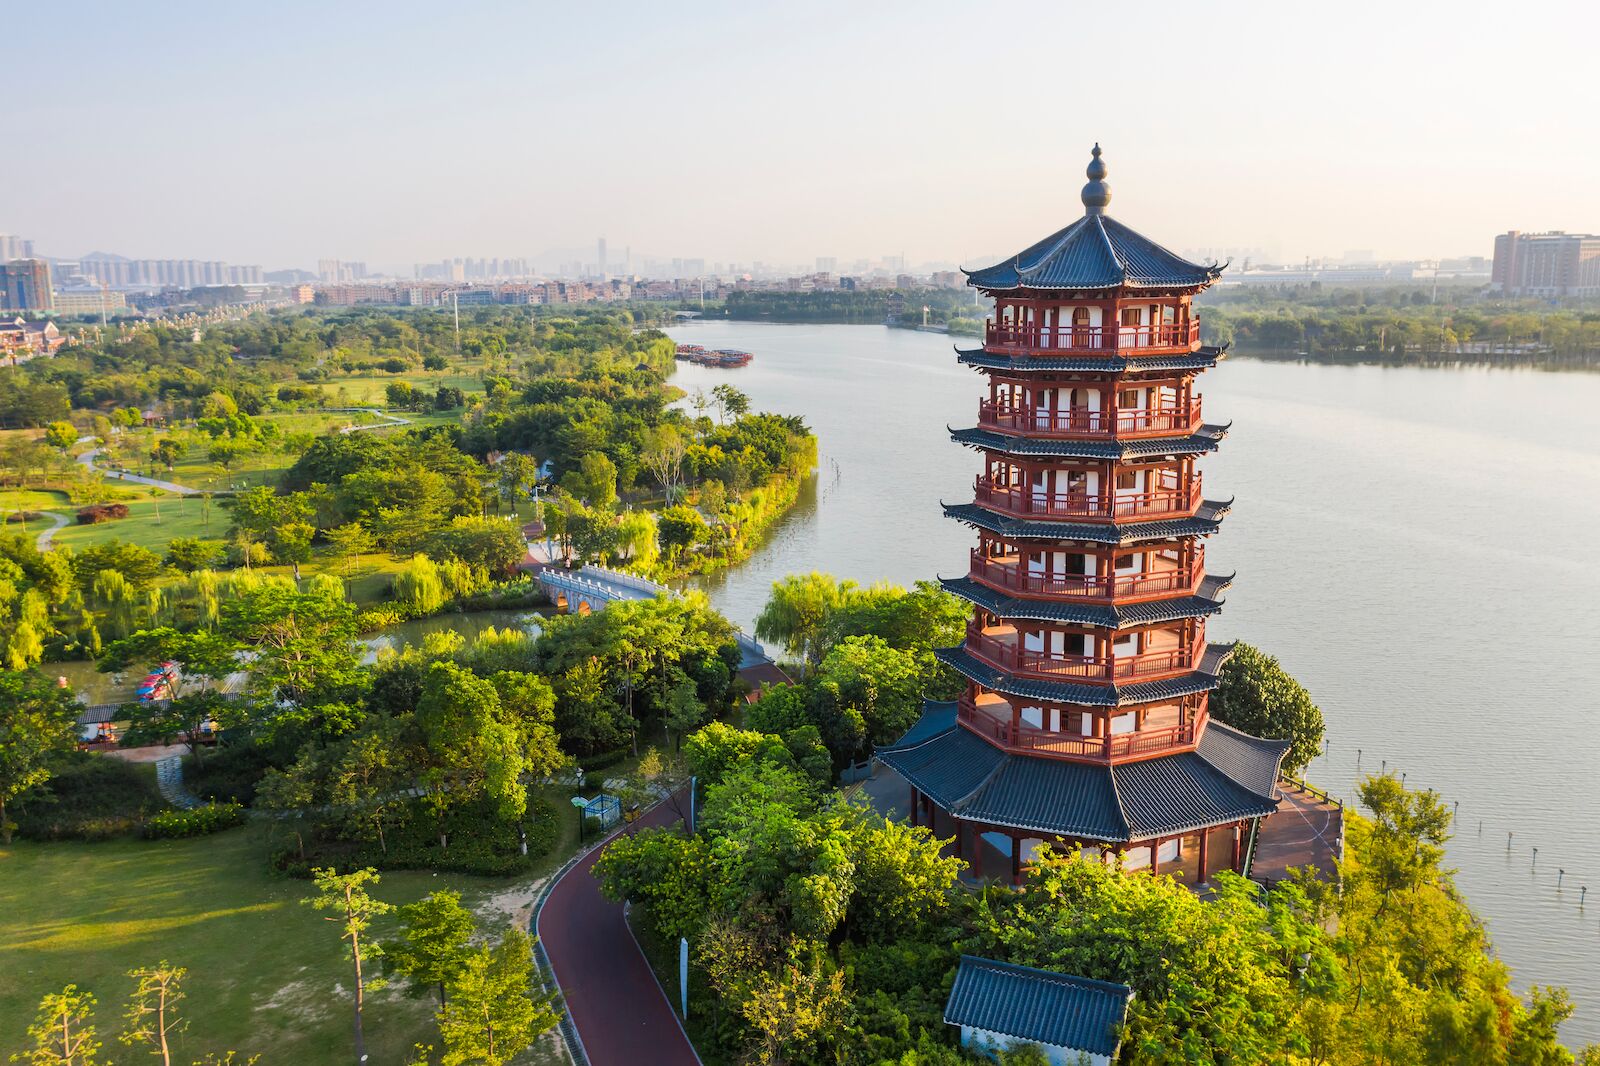 Aerial photo of Huayang Lake Wetland Park, Dongguan, Guangdong Province, China. Dongguan is one of the largest cities in China.